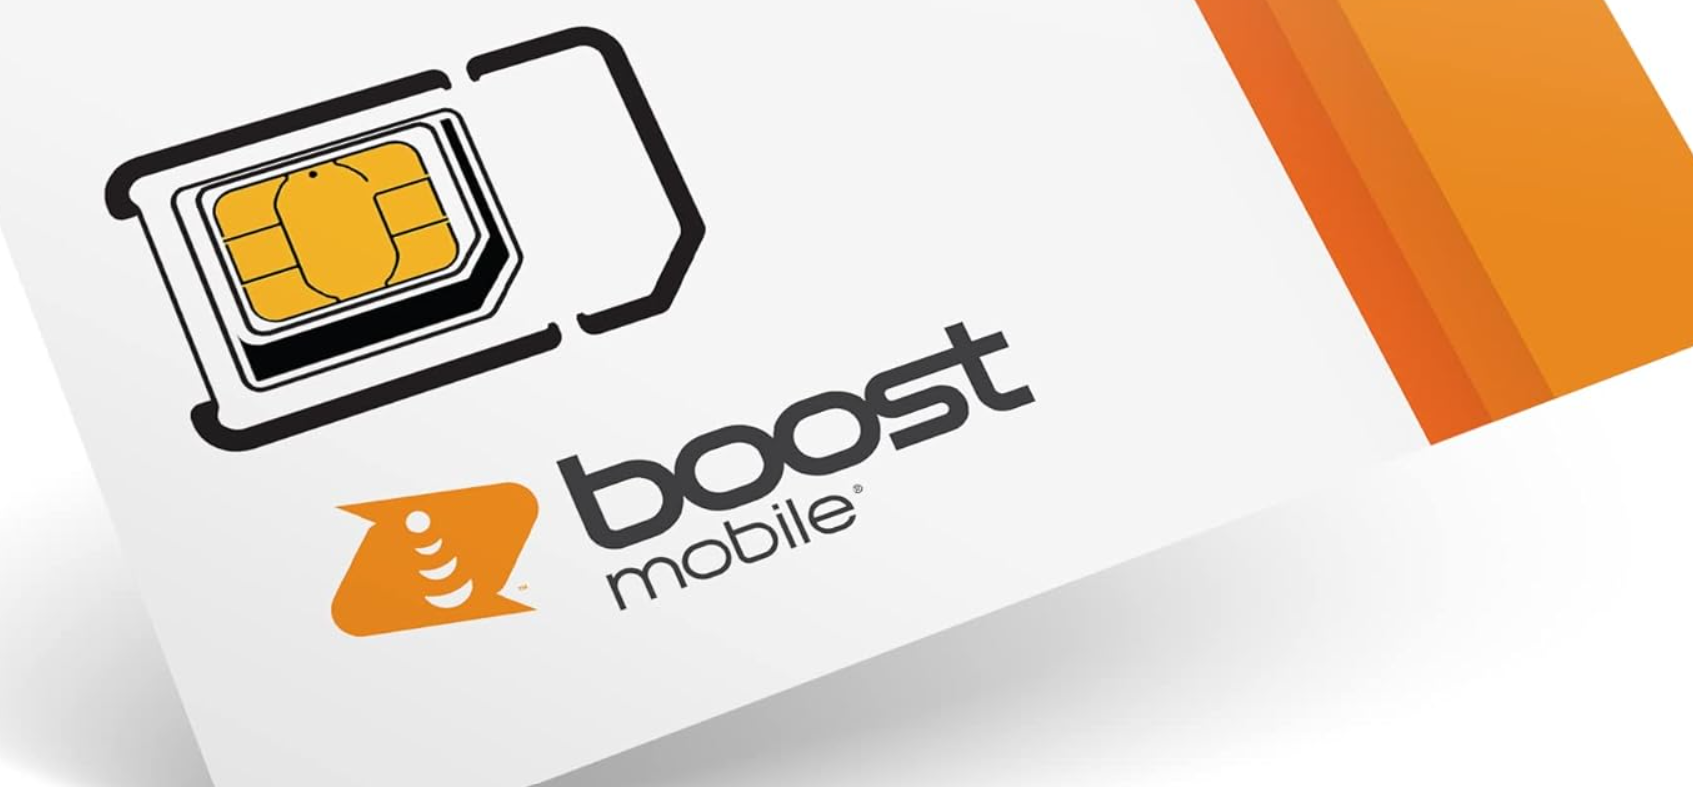 How to Make a Boost Mobile Online Payment?